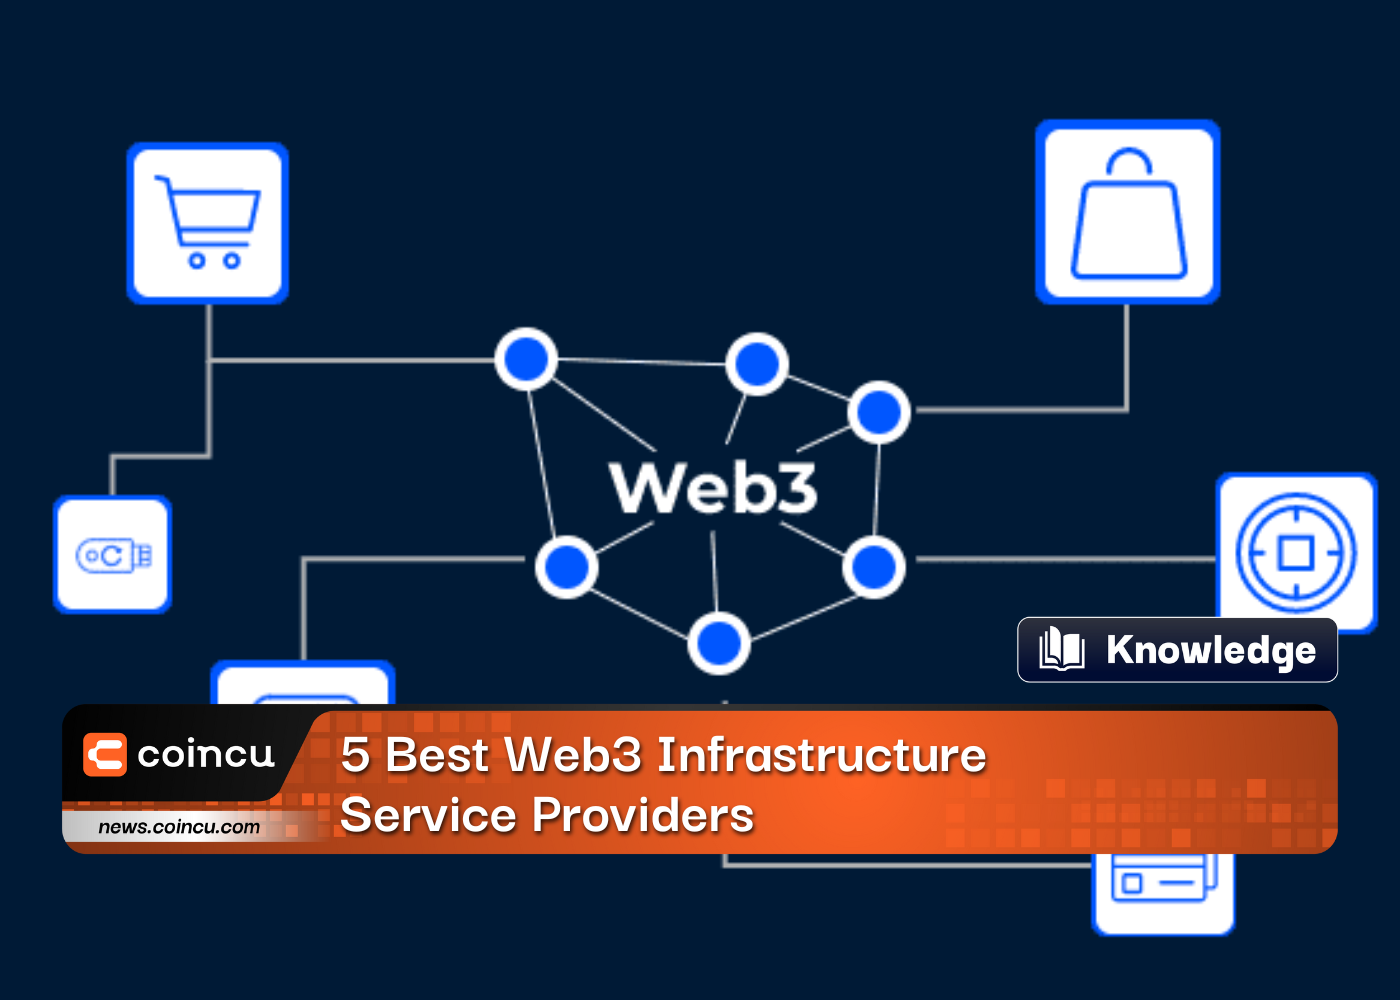 5 Best Web3 Infrastructure Service Providers